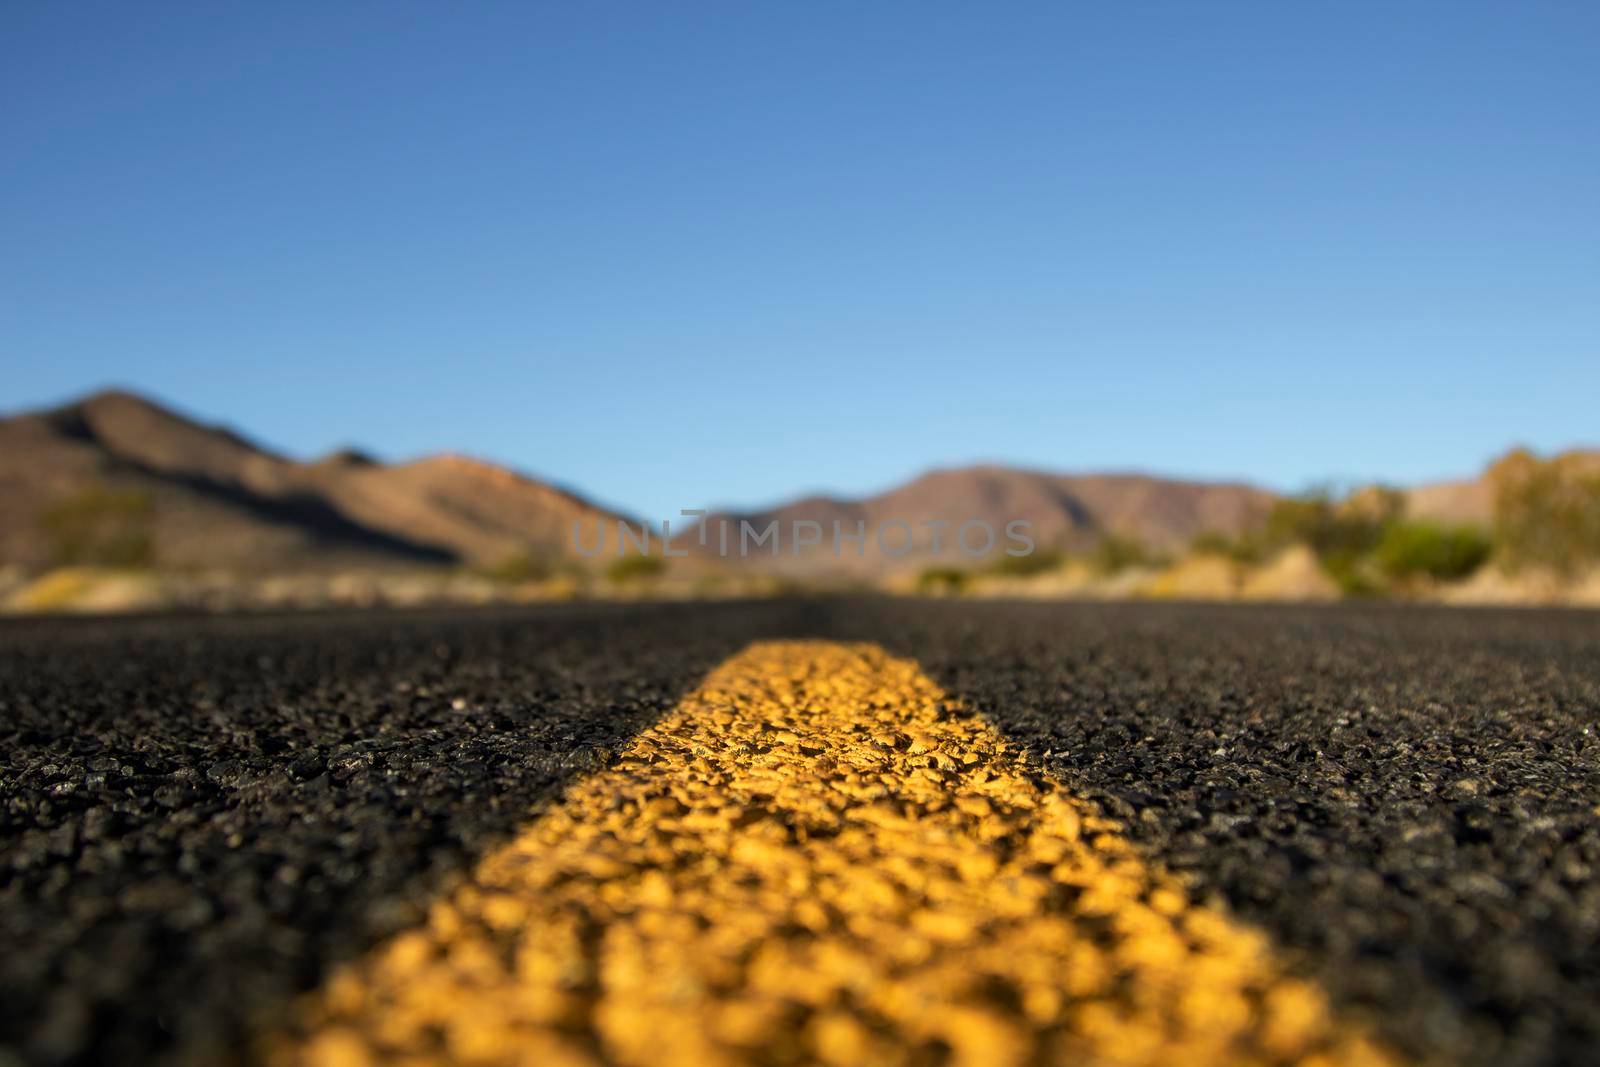 Landscape showing some mountains under a blue clear sky viewed from the asphalt of a road in California